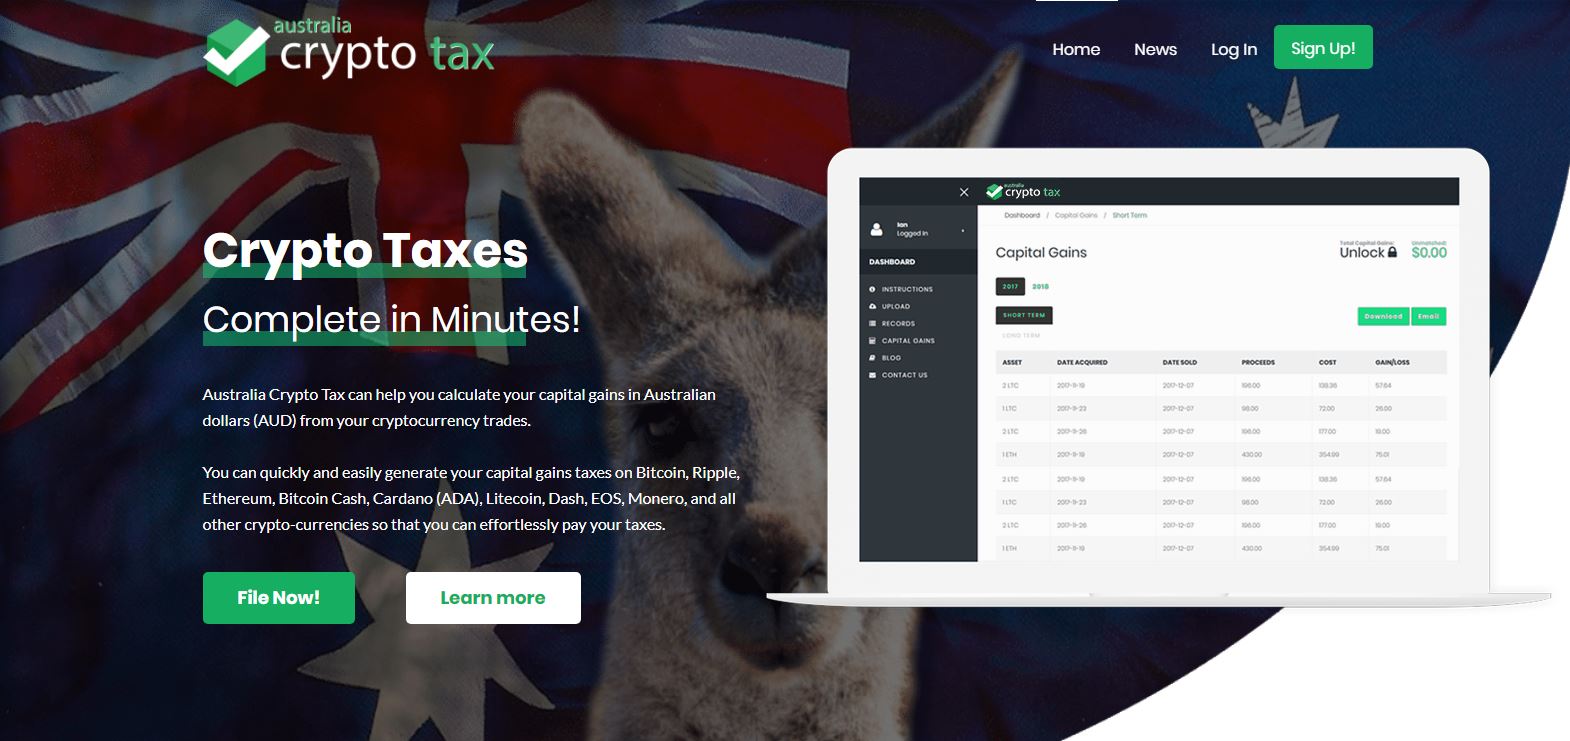 Australia Crypto Tax can help you calculate your capital gains in Australian dollars (AUD) from your cryptocurrency trades.